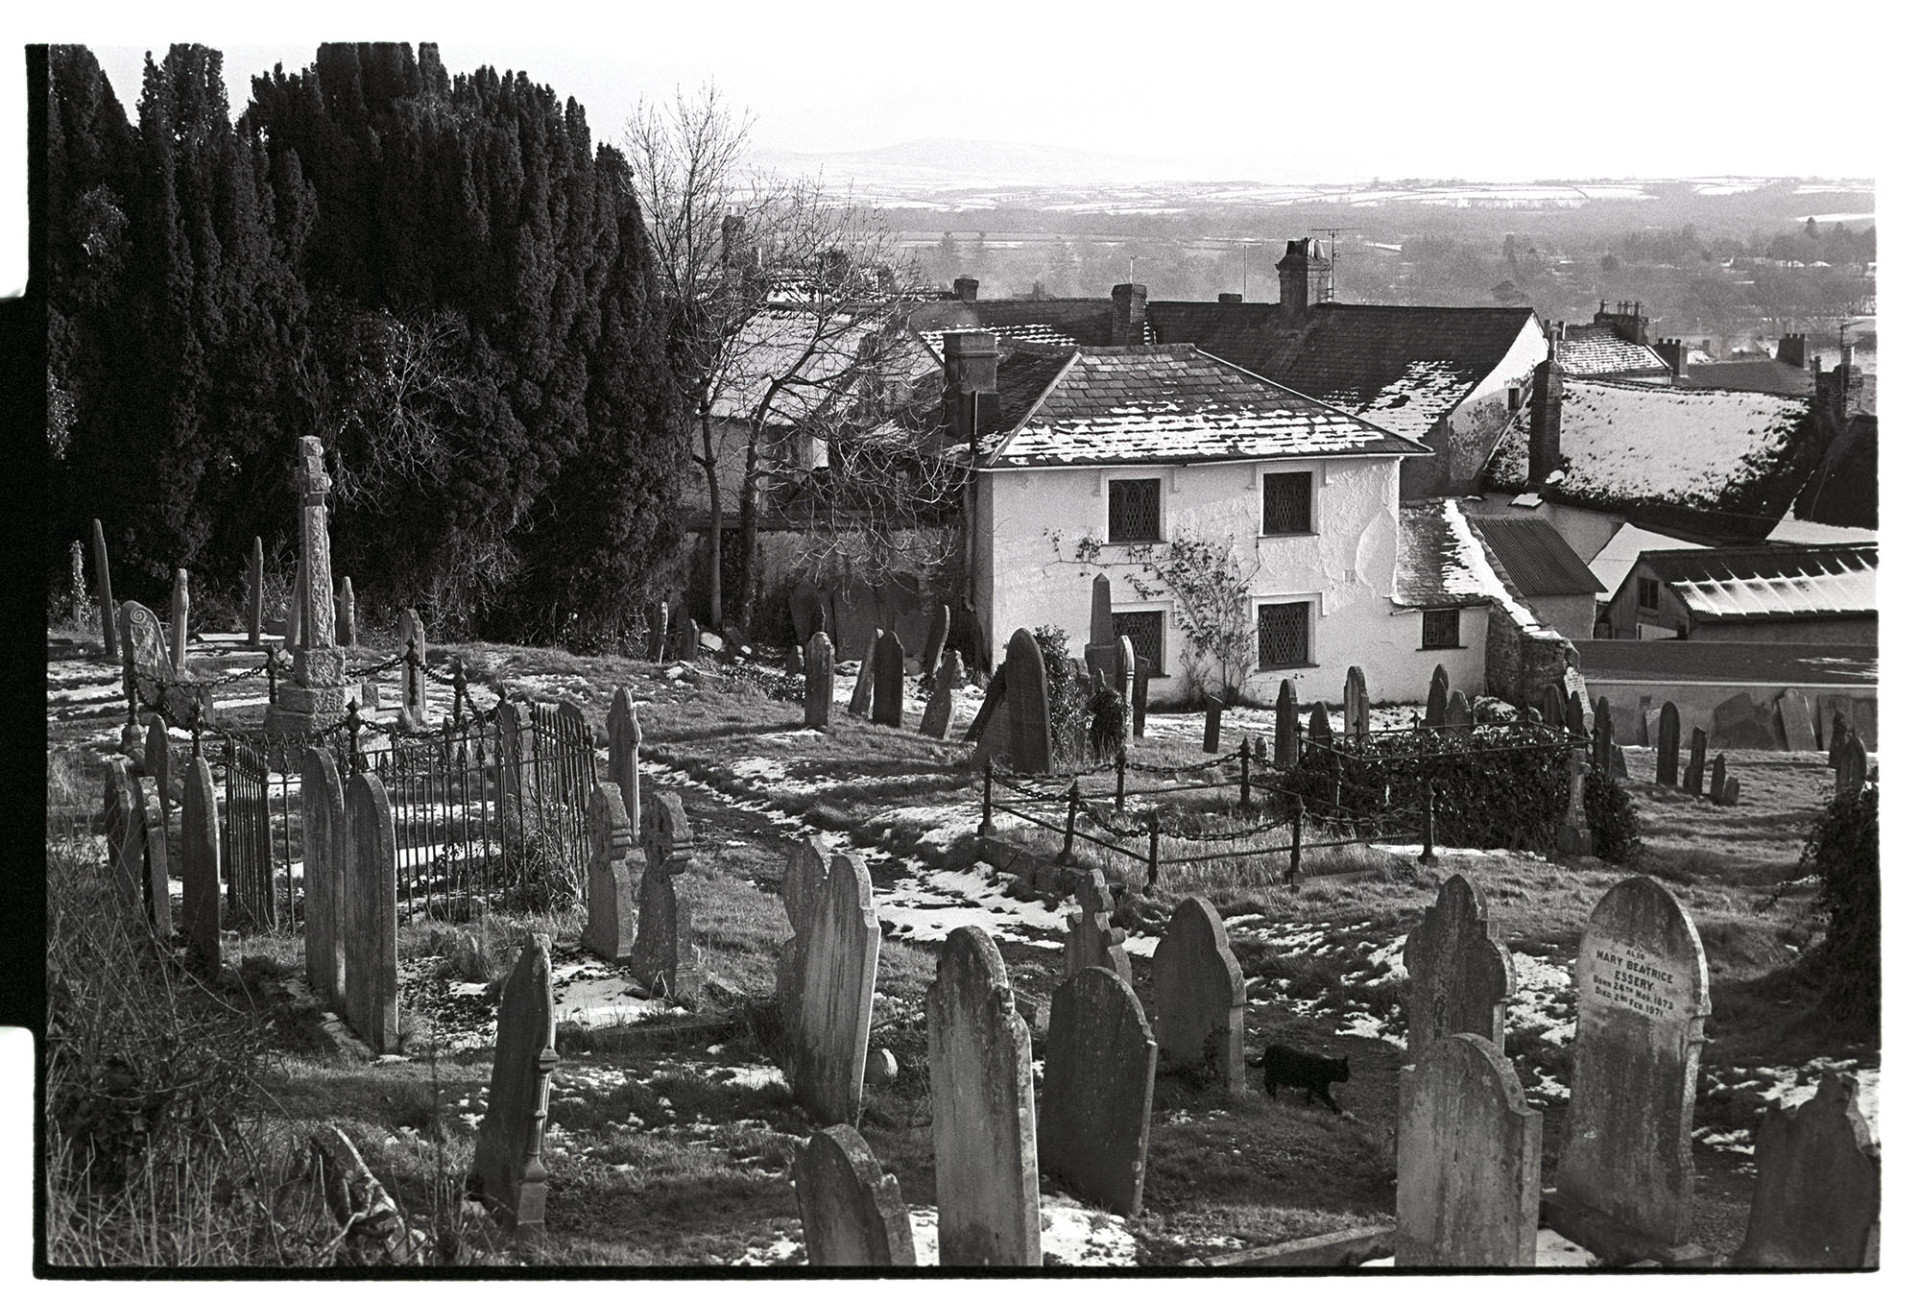 View across graveyard with town under snow, black cat.
[A view of gravestones in Hatherleigh churchyard and snow covered roofs in the town, with Dartmoor in the distance.  A black cat is walking along the churchyard path.]